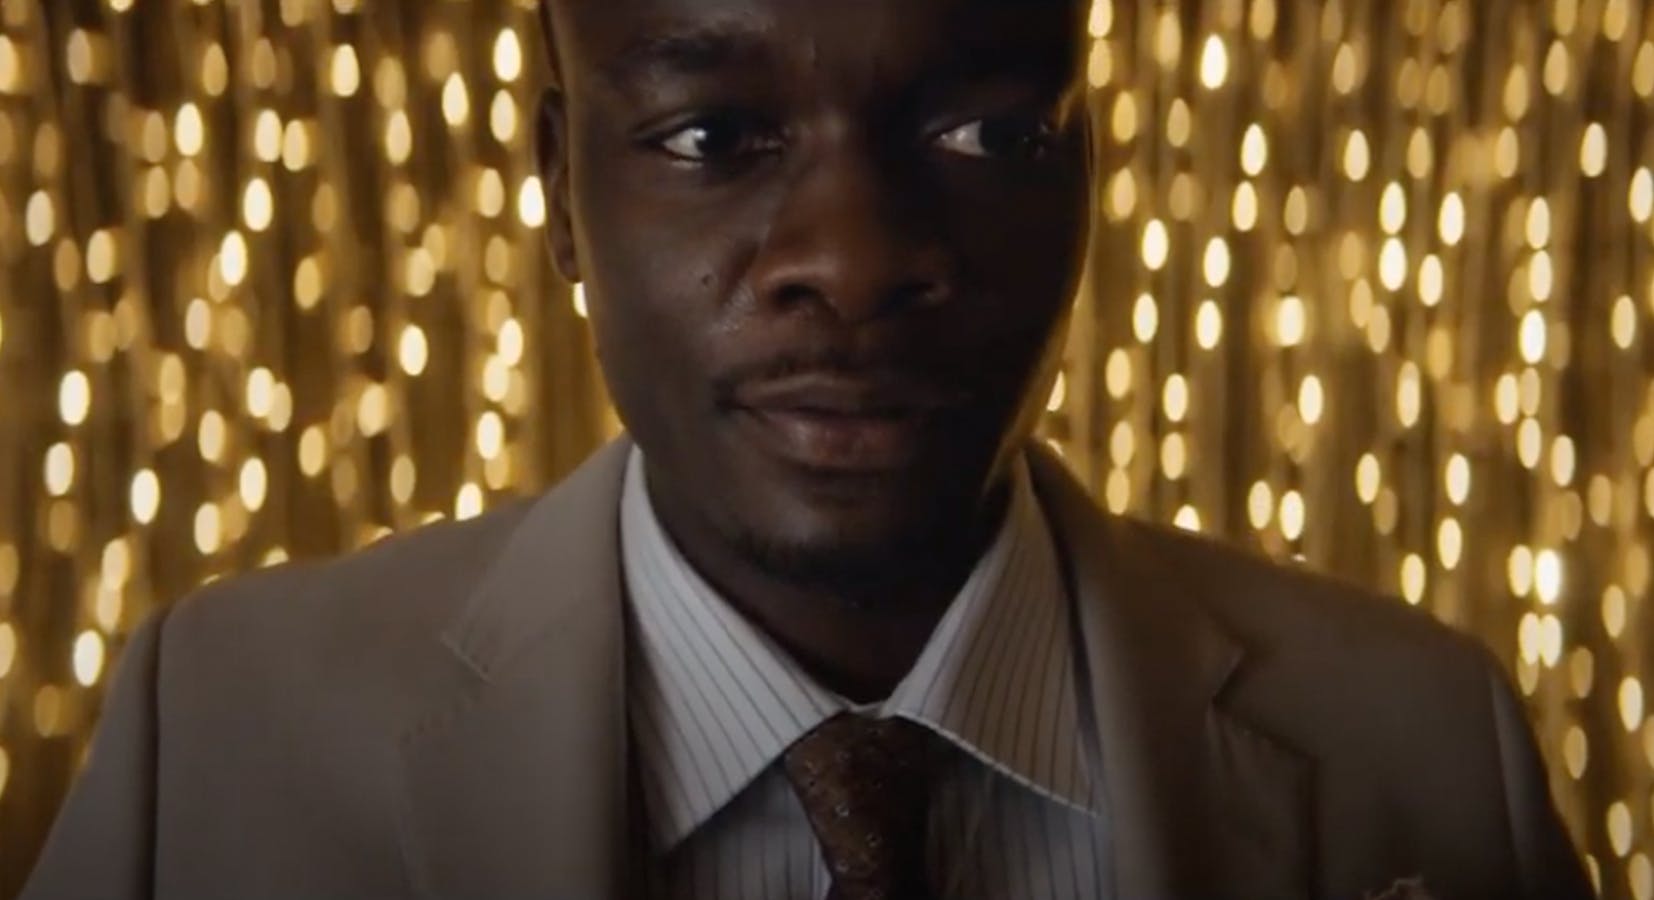 Close-up of a man wearing a suit, looking nervously to the side. In the background, twinkling lights. 